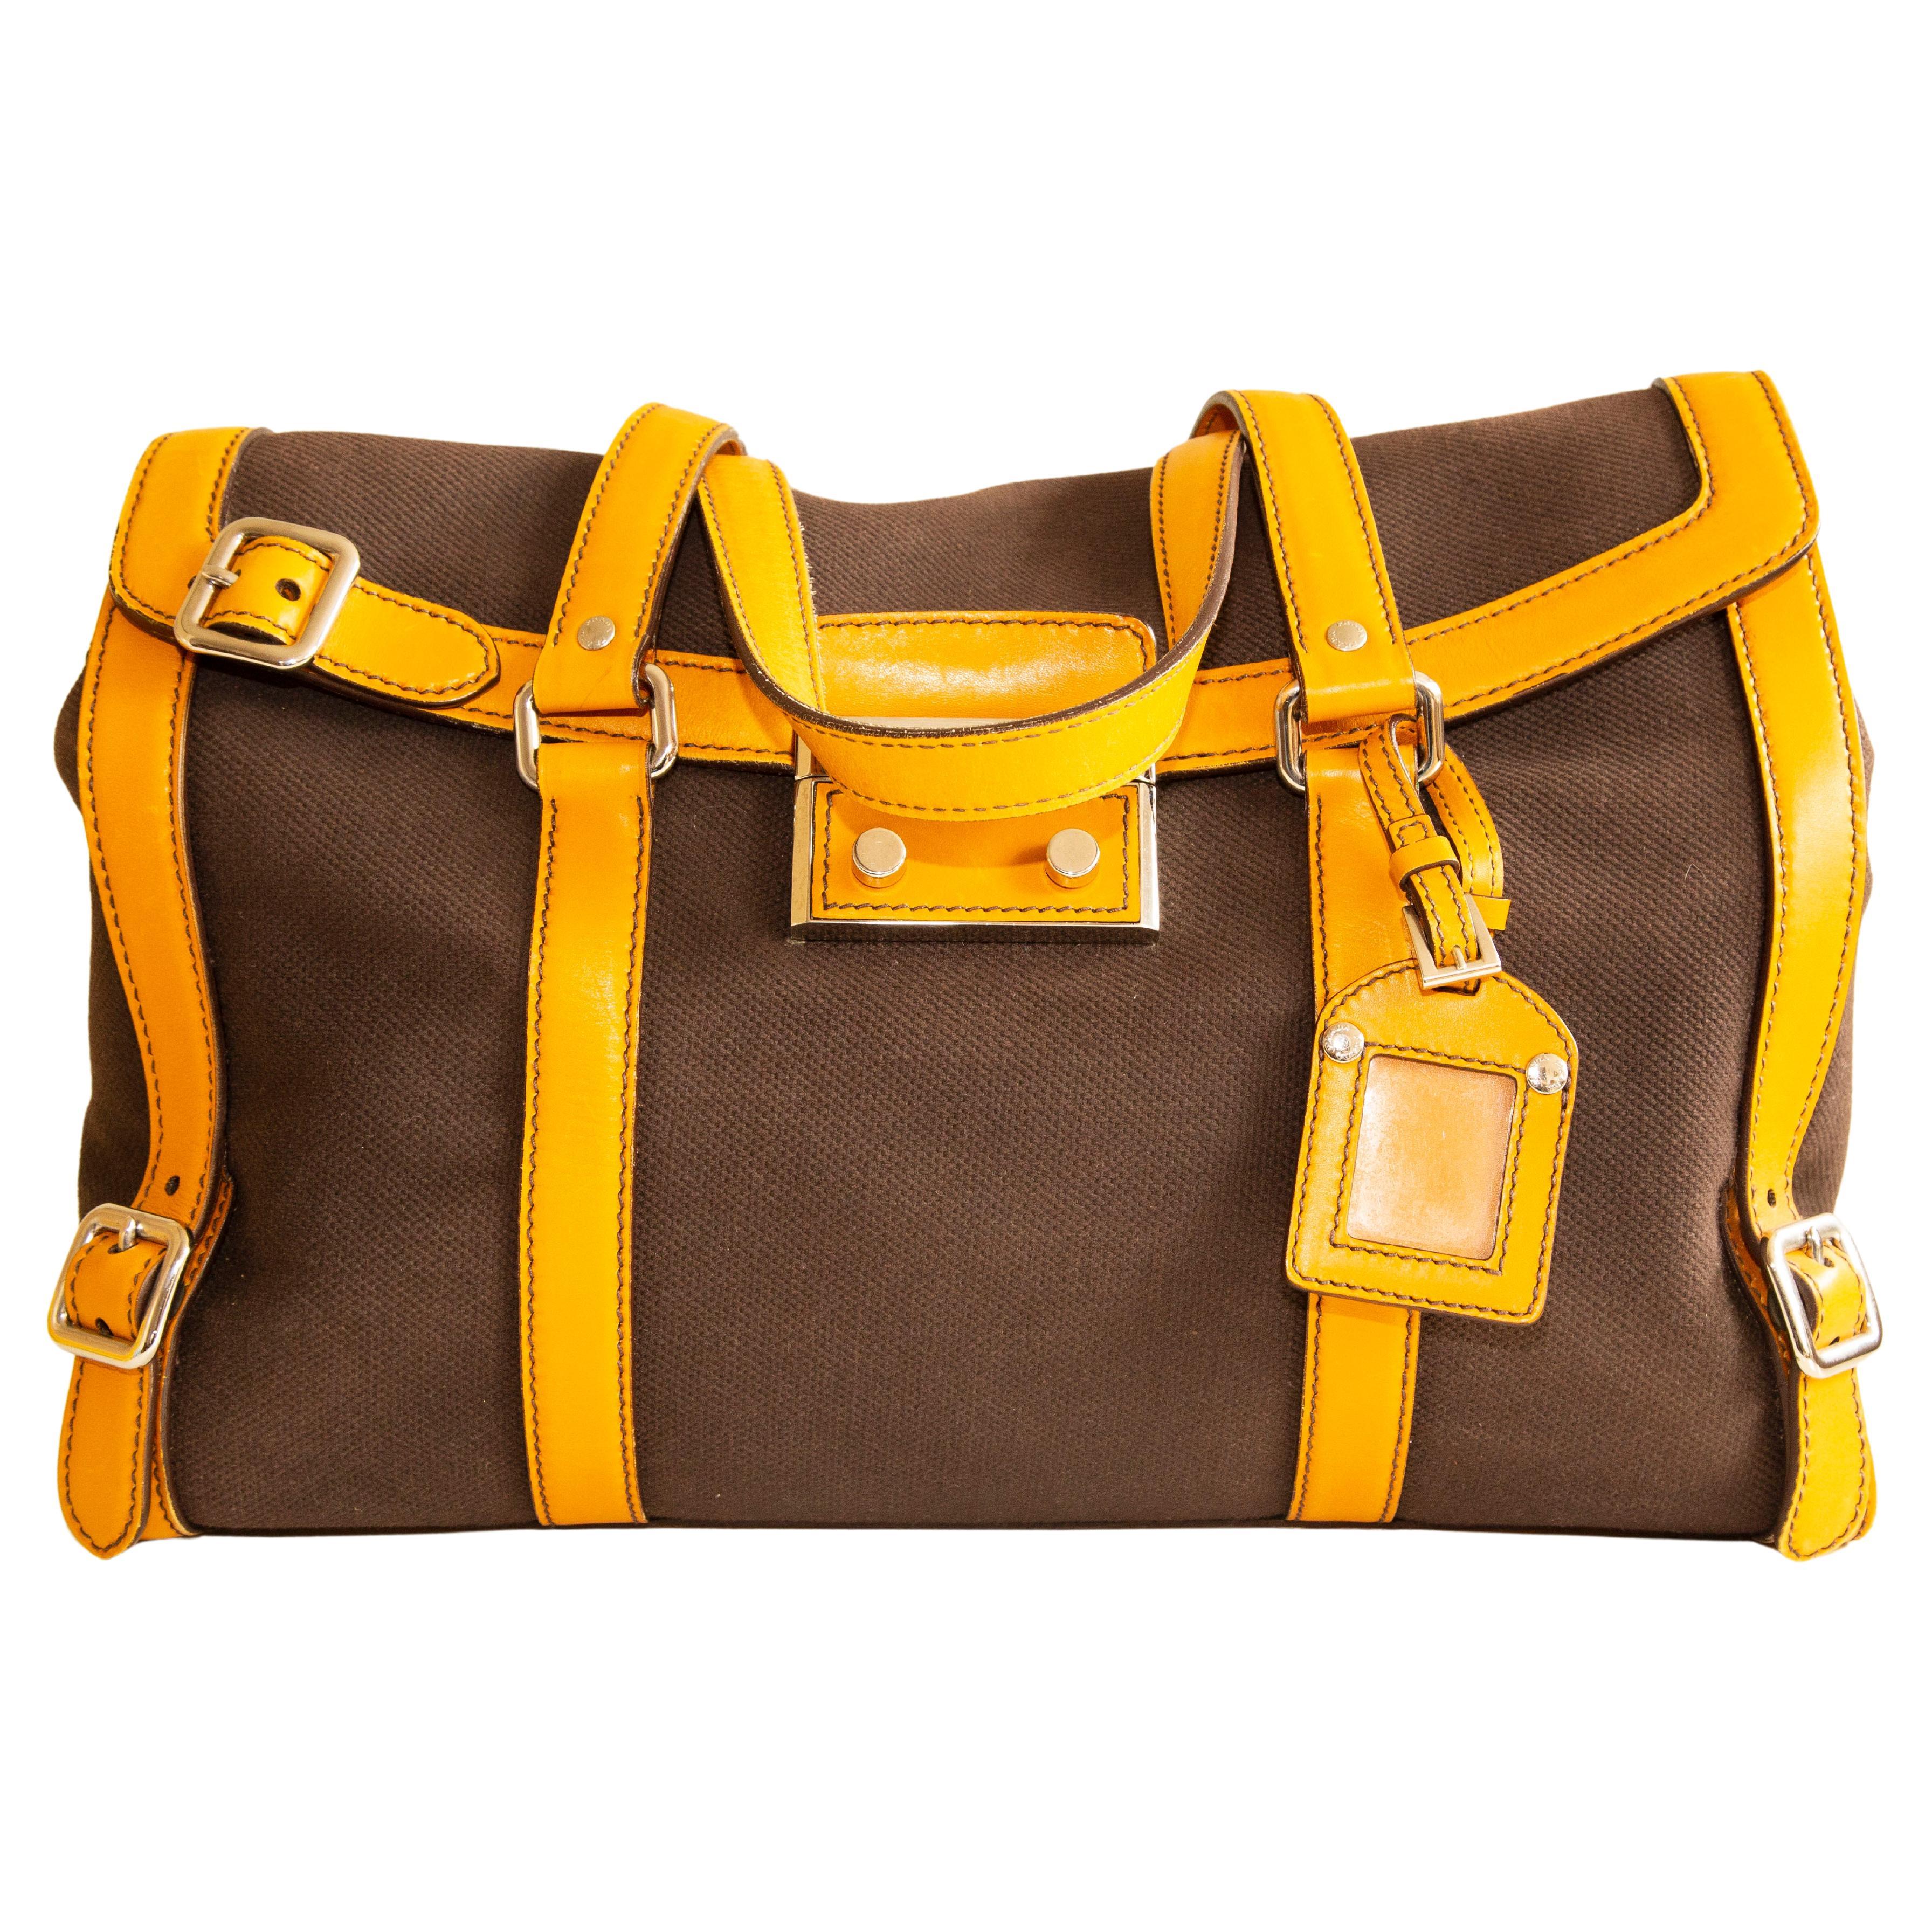 Prada Large Shoulder Bag in Brown Canvas and Yellow Leather Trim For Sale